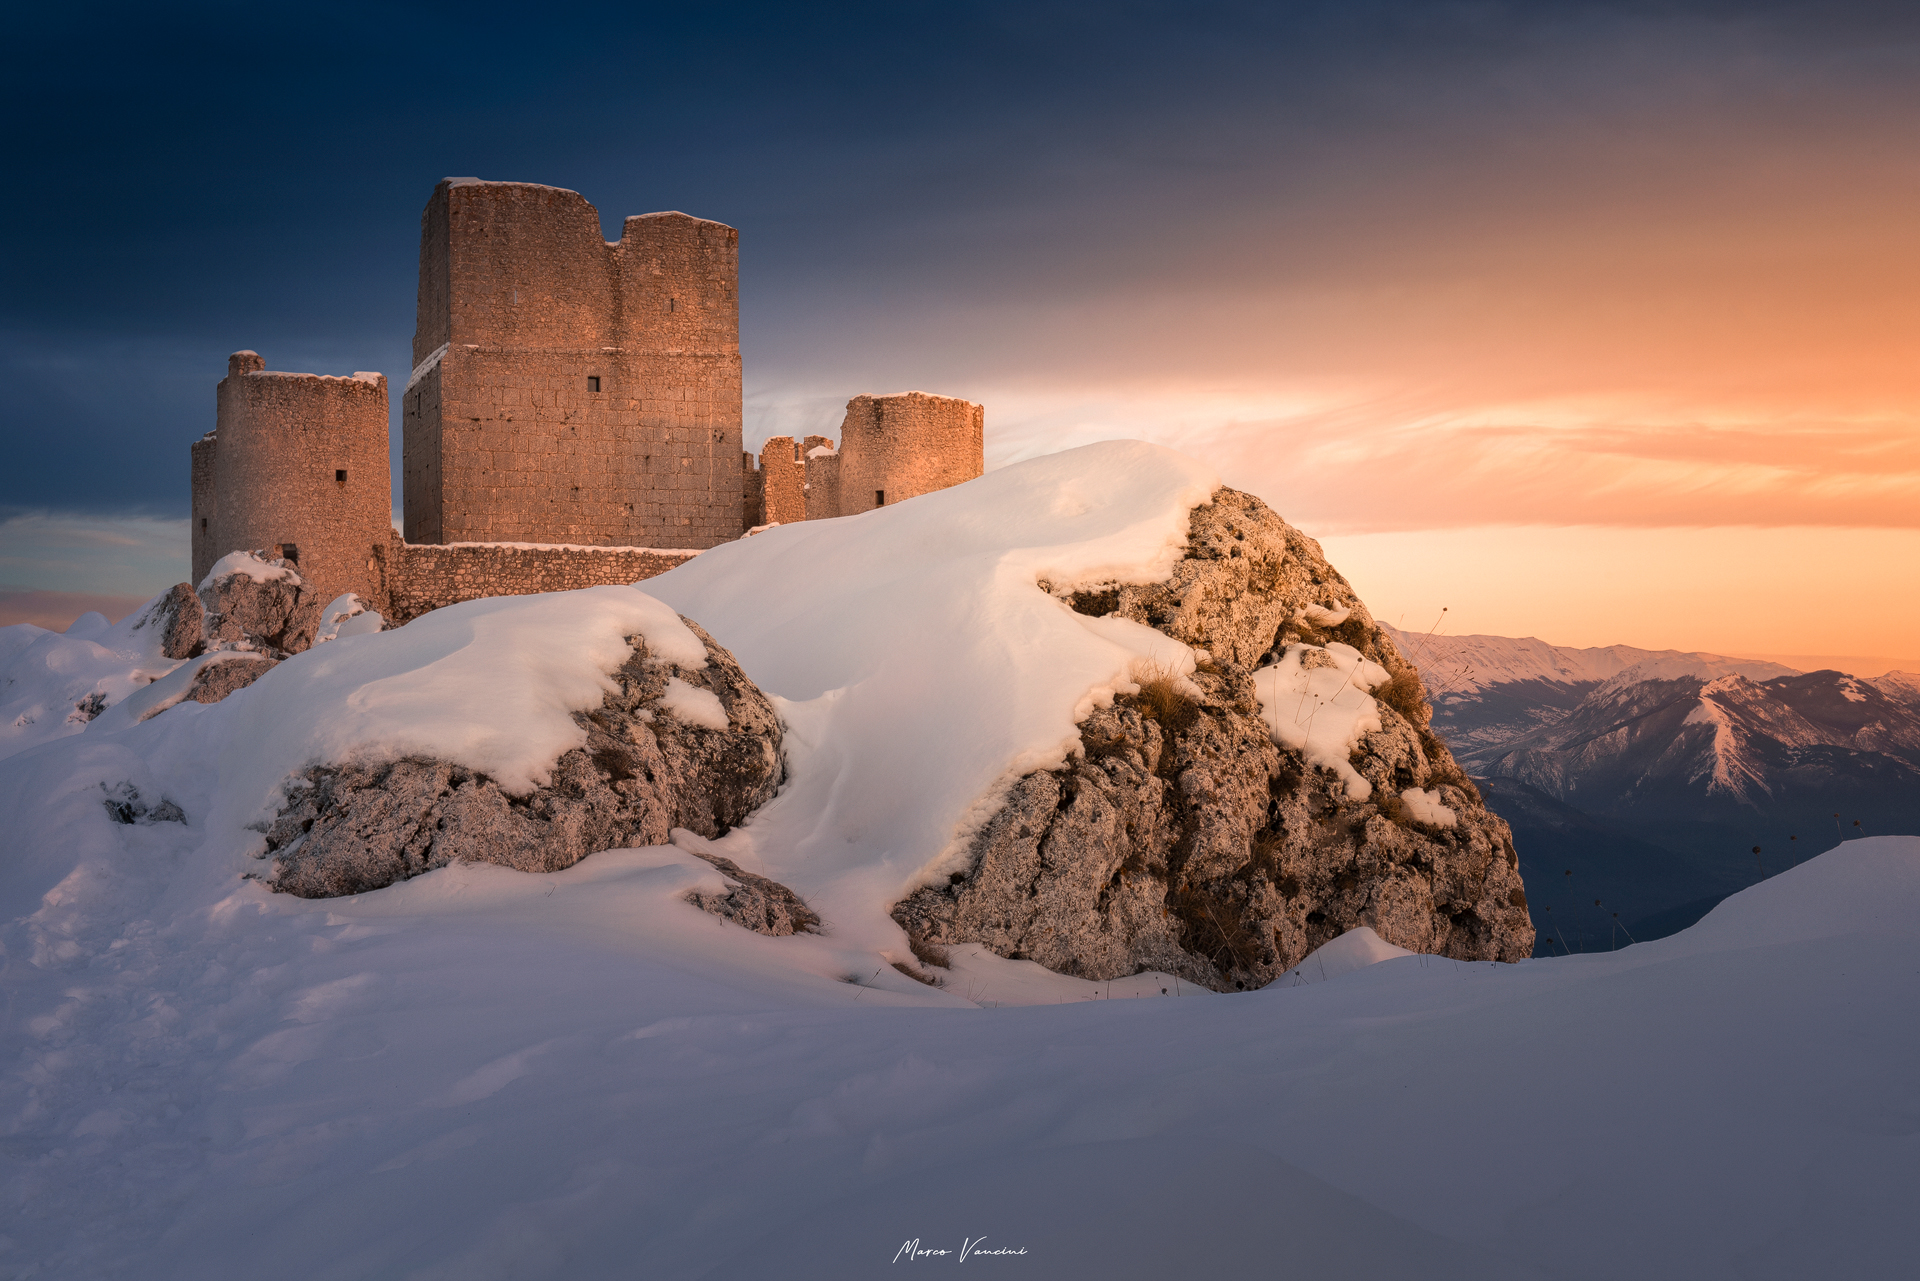 Among the snow-capped mountains stood that magical castle...